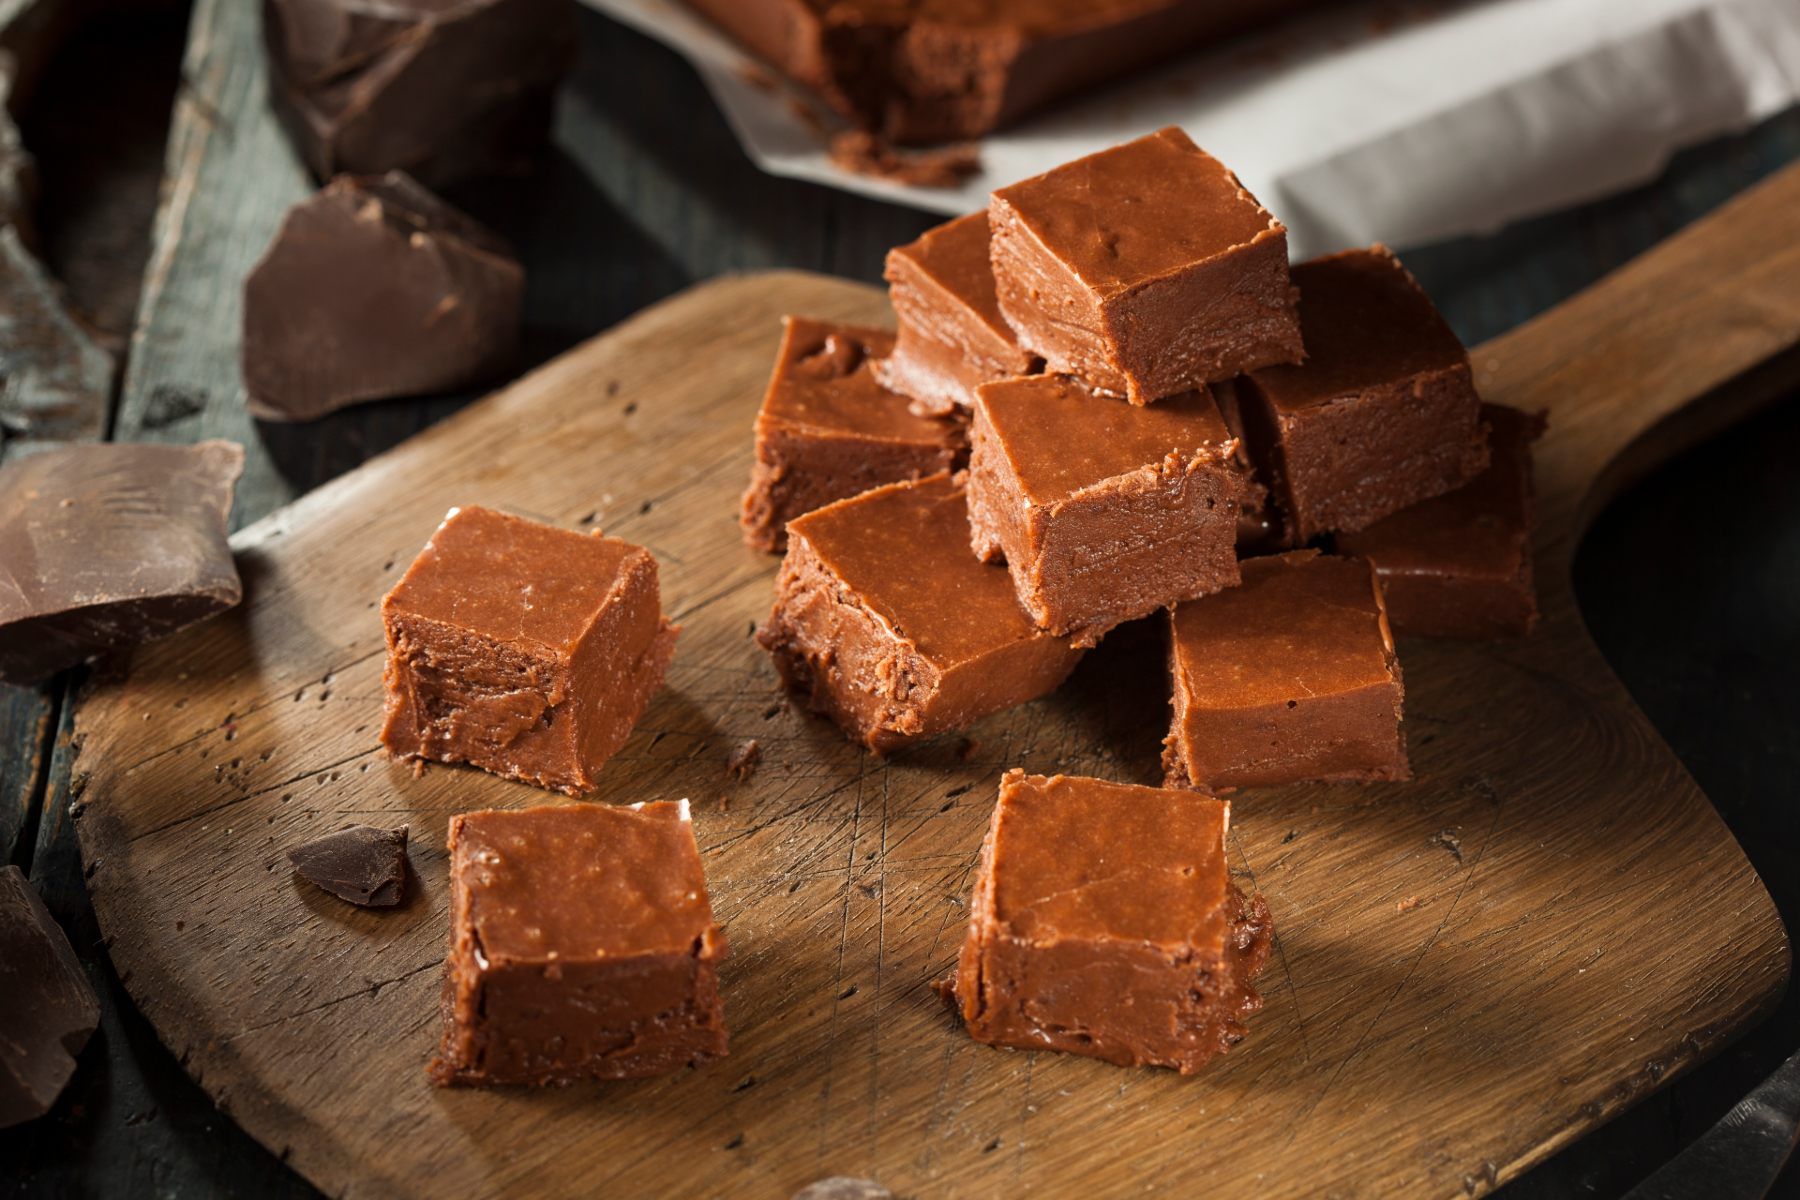 Cubes of fudge sit on a wooden cutting board - Keebler fudge